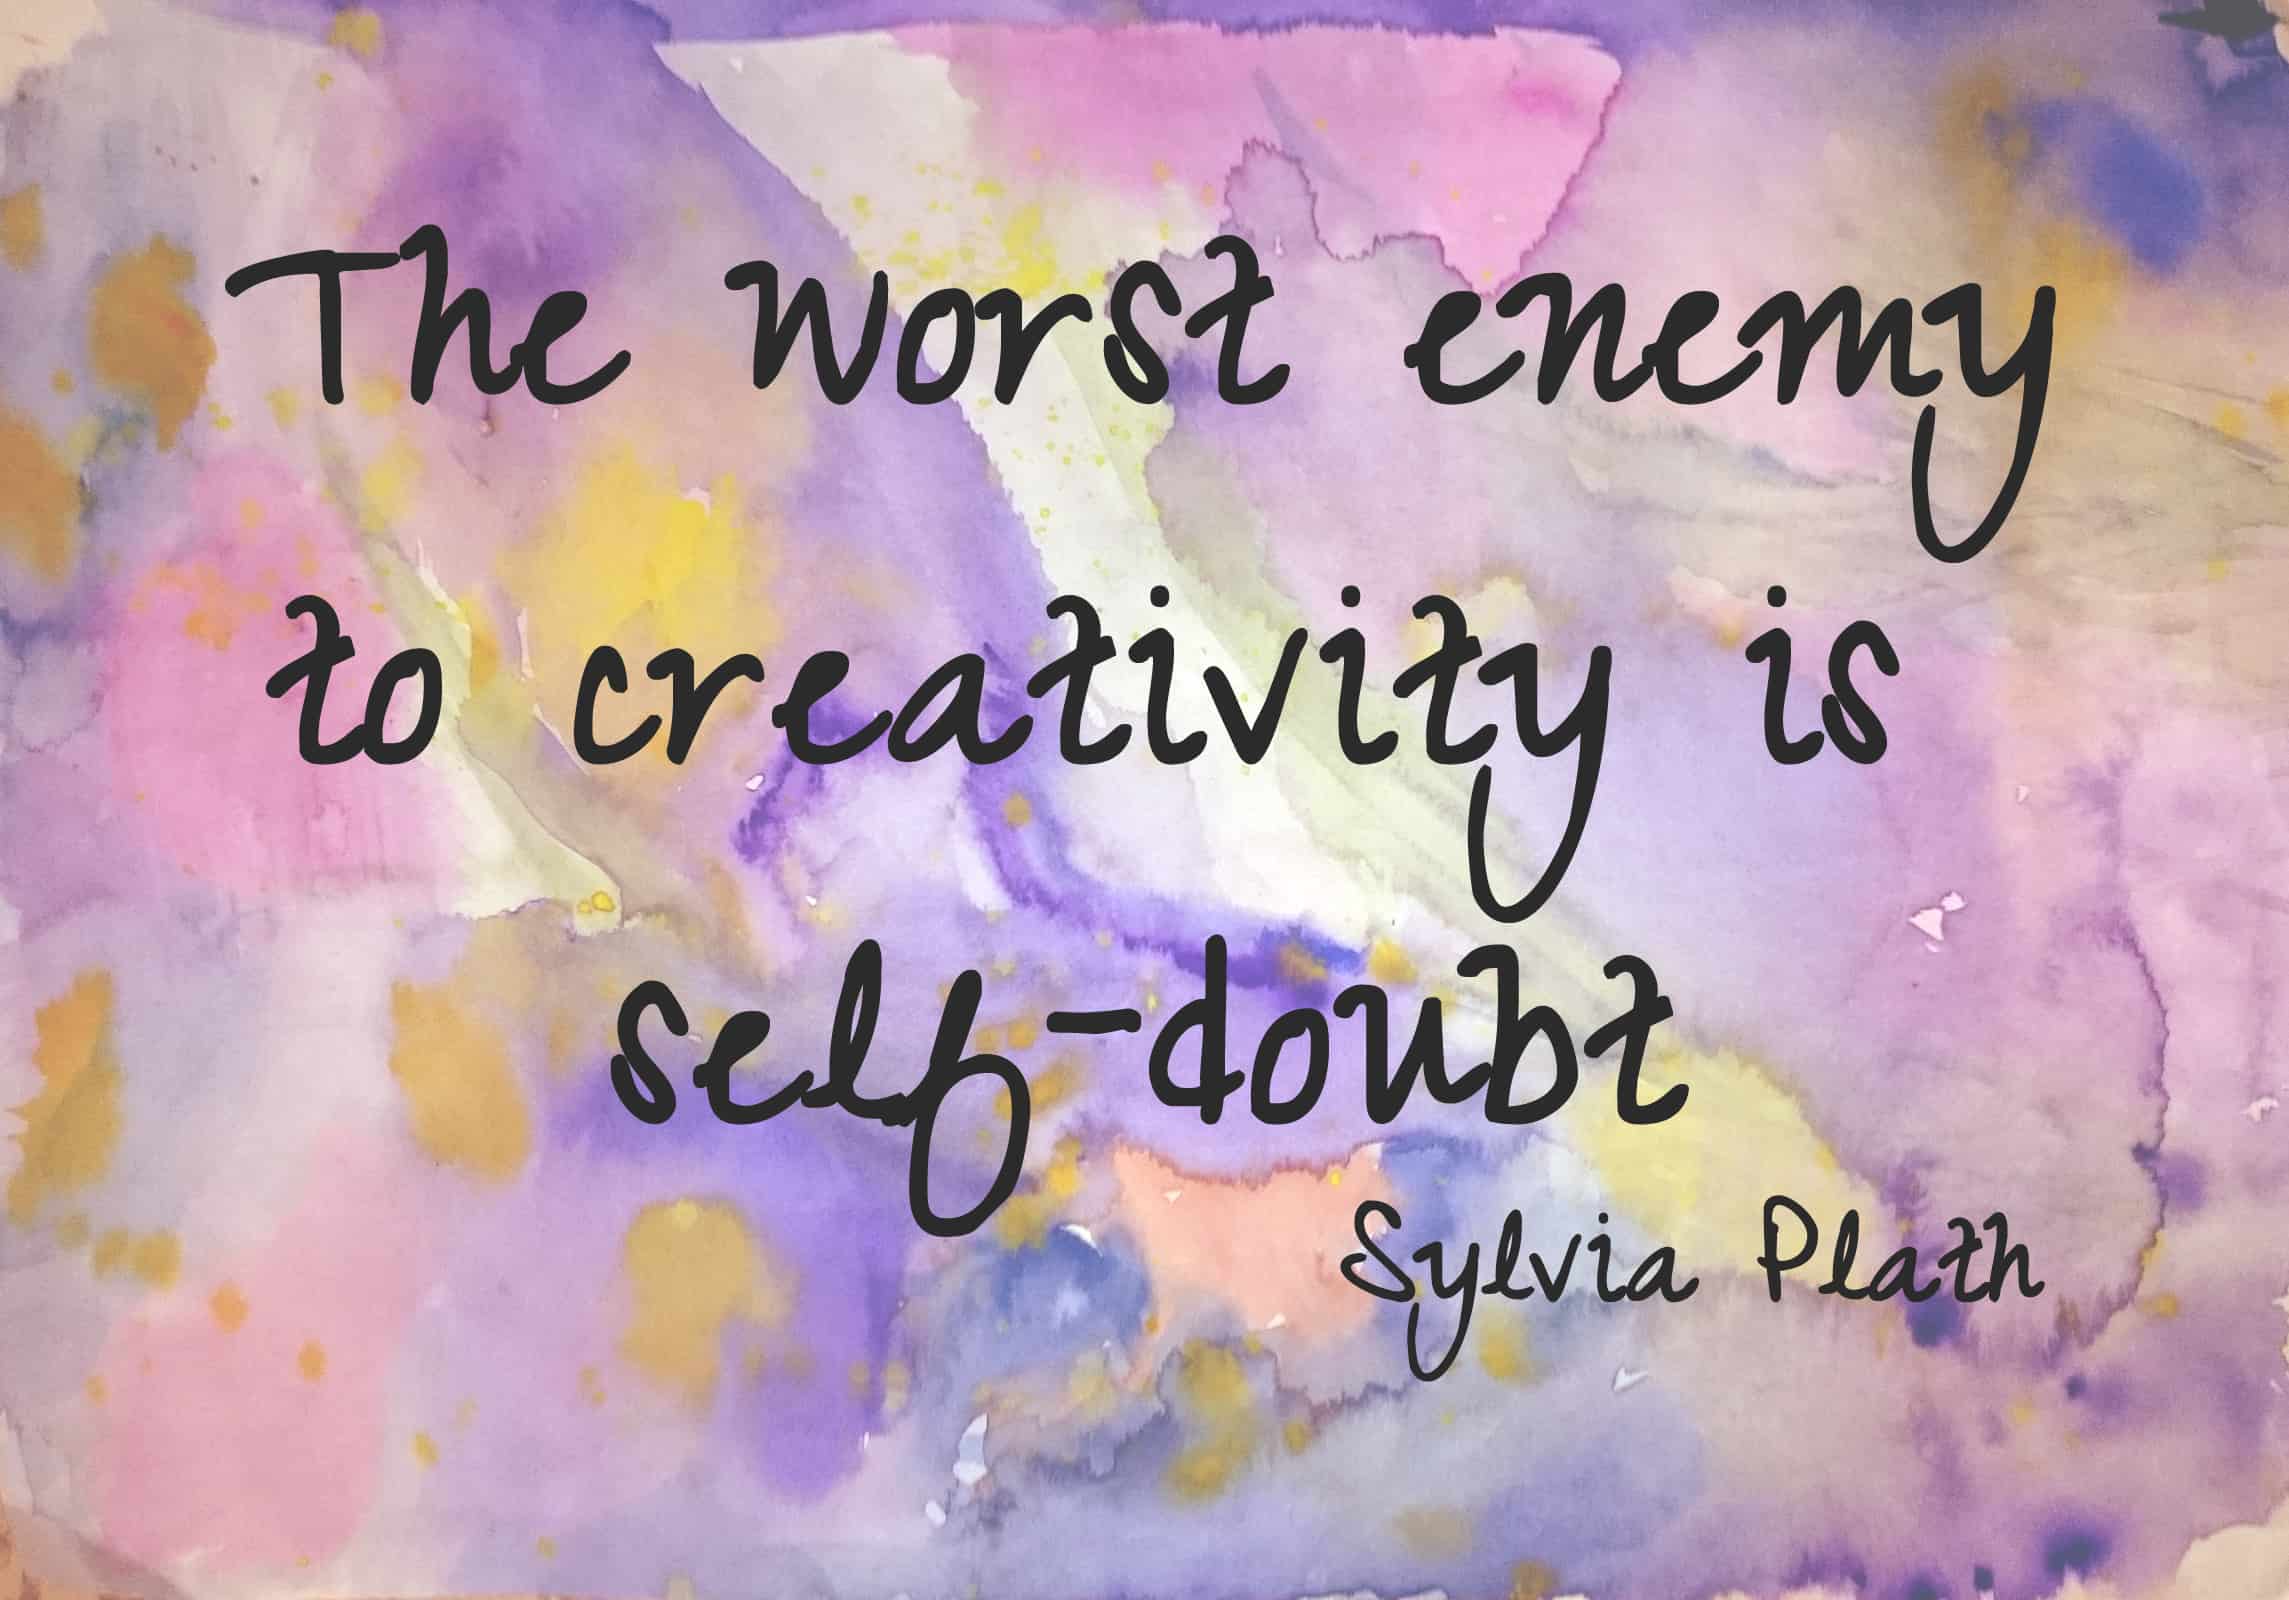 The worst enemy to creativity is self-doubt - Sylvia Plath